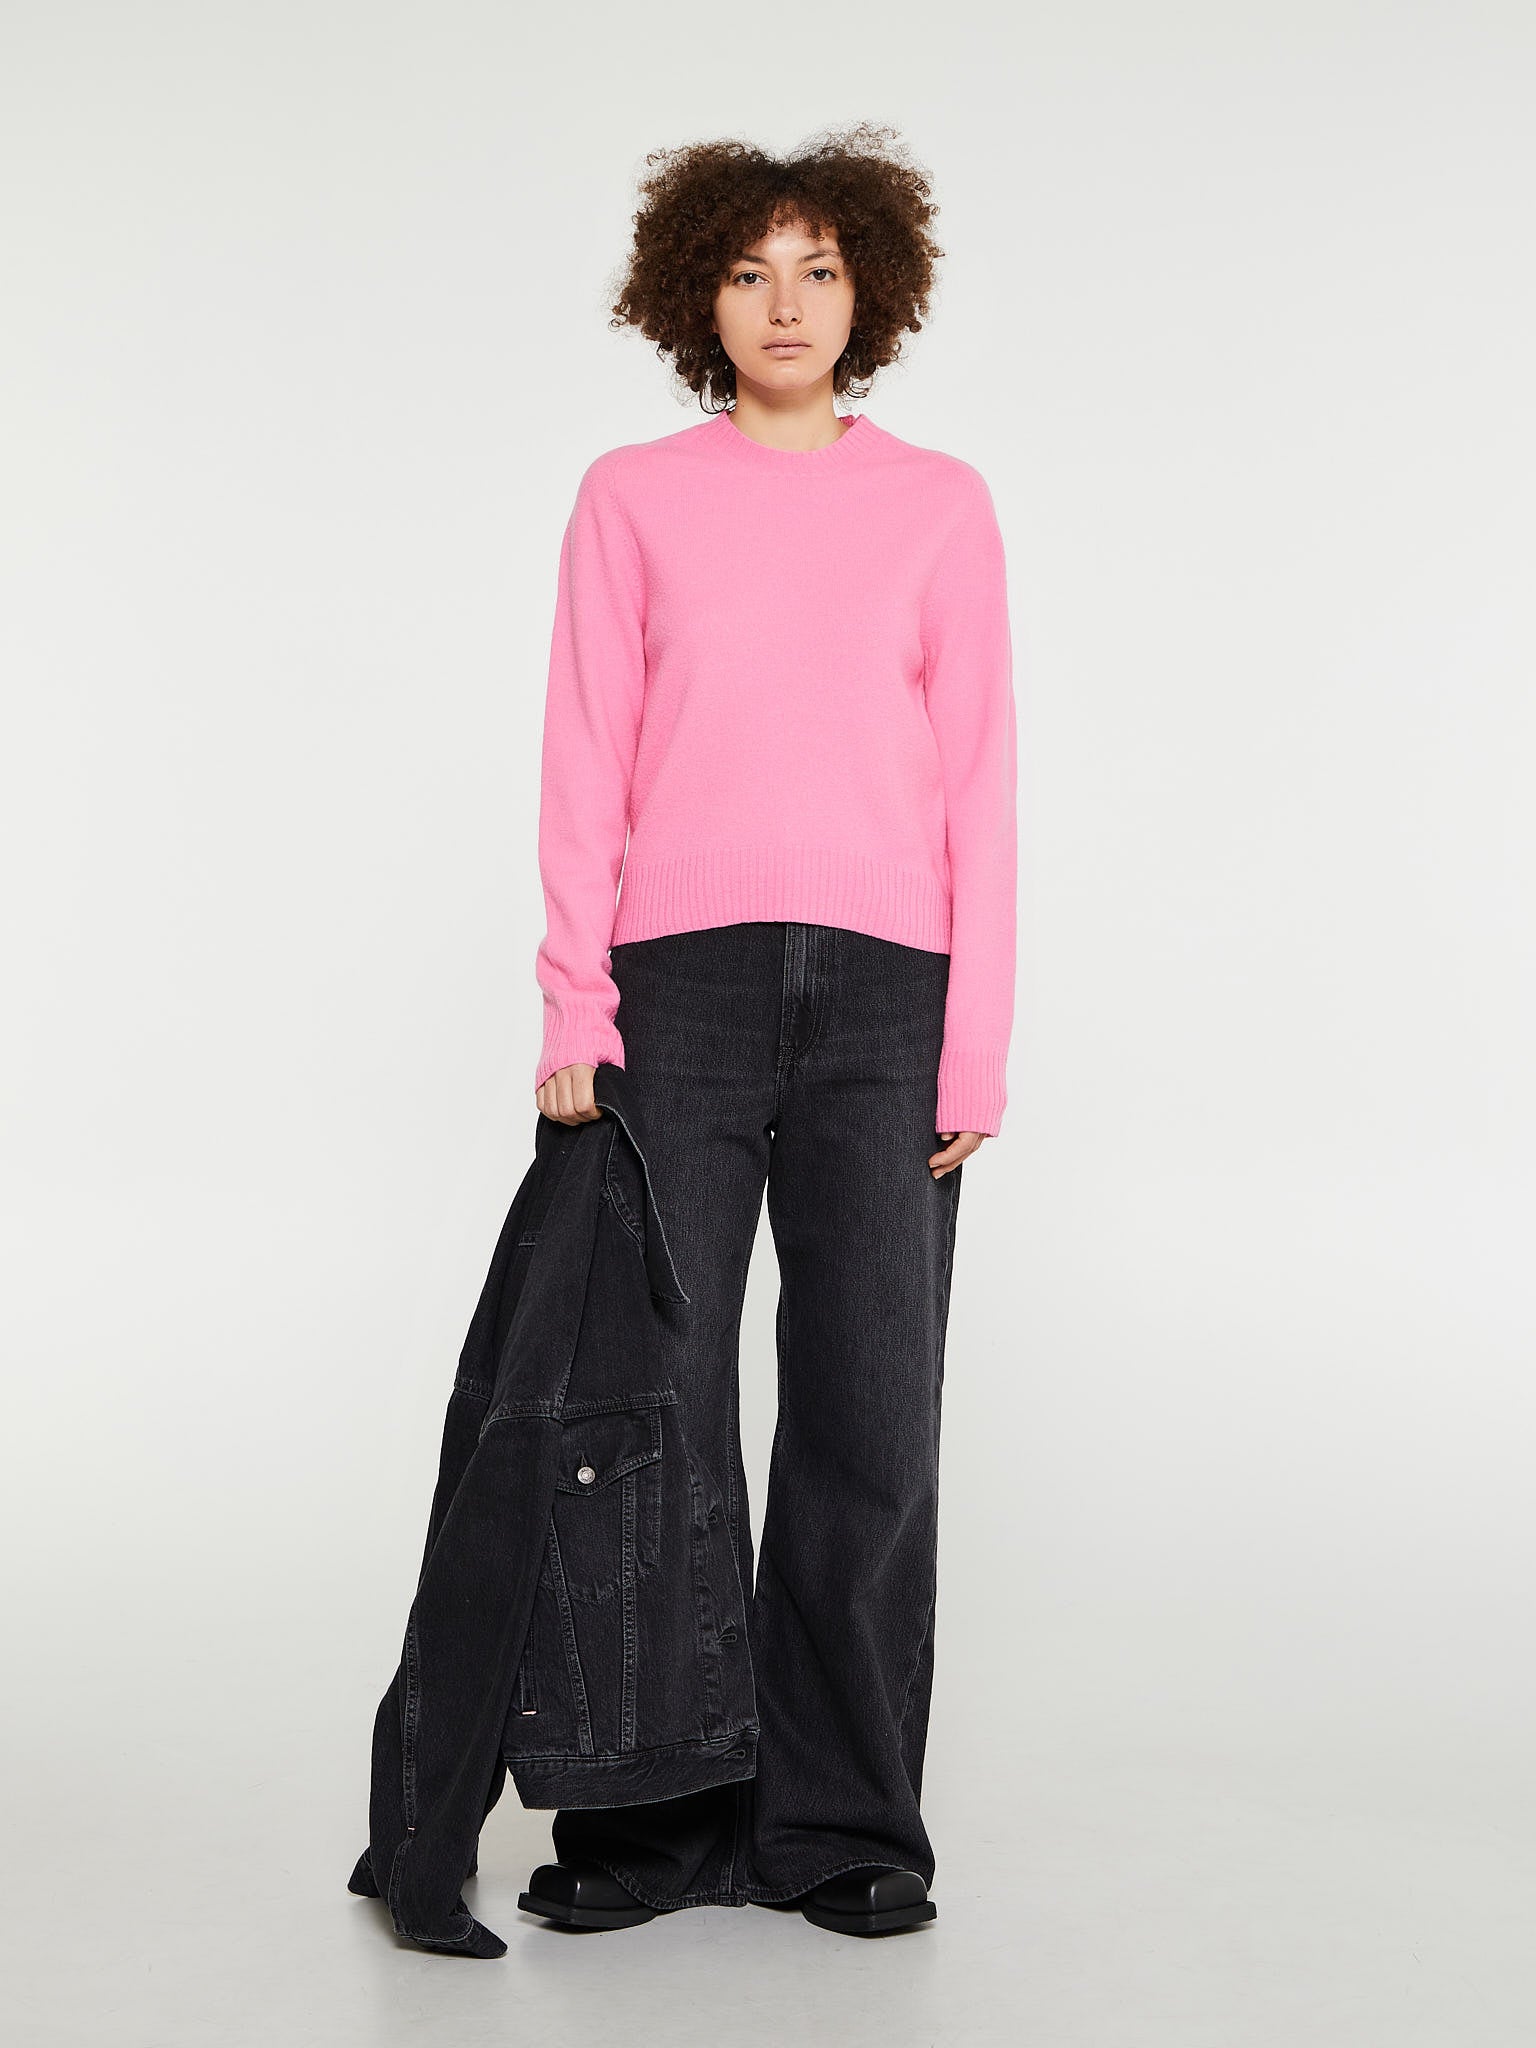 Crewneck Sweater in Electric Pink